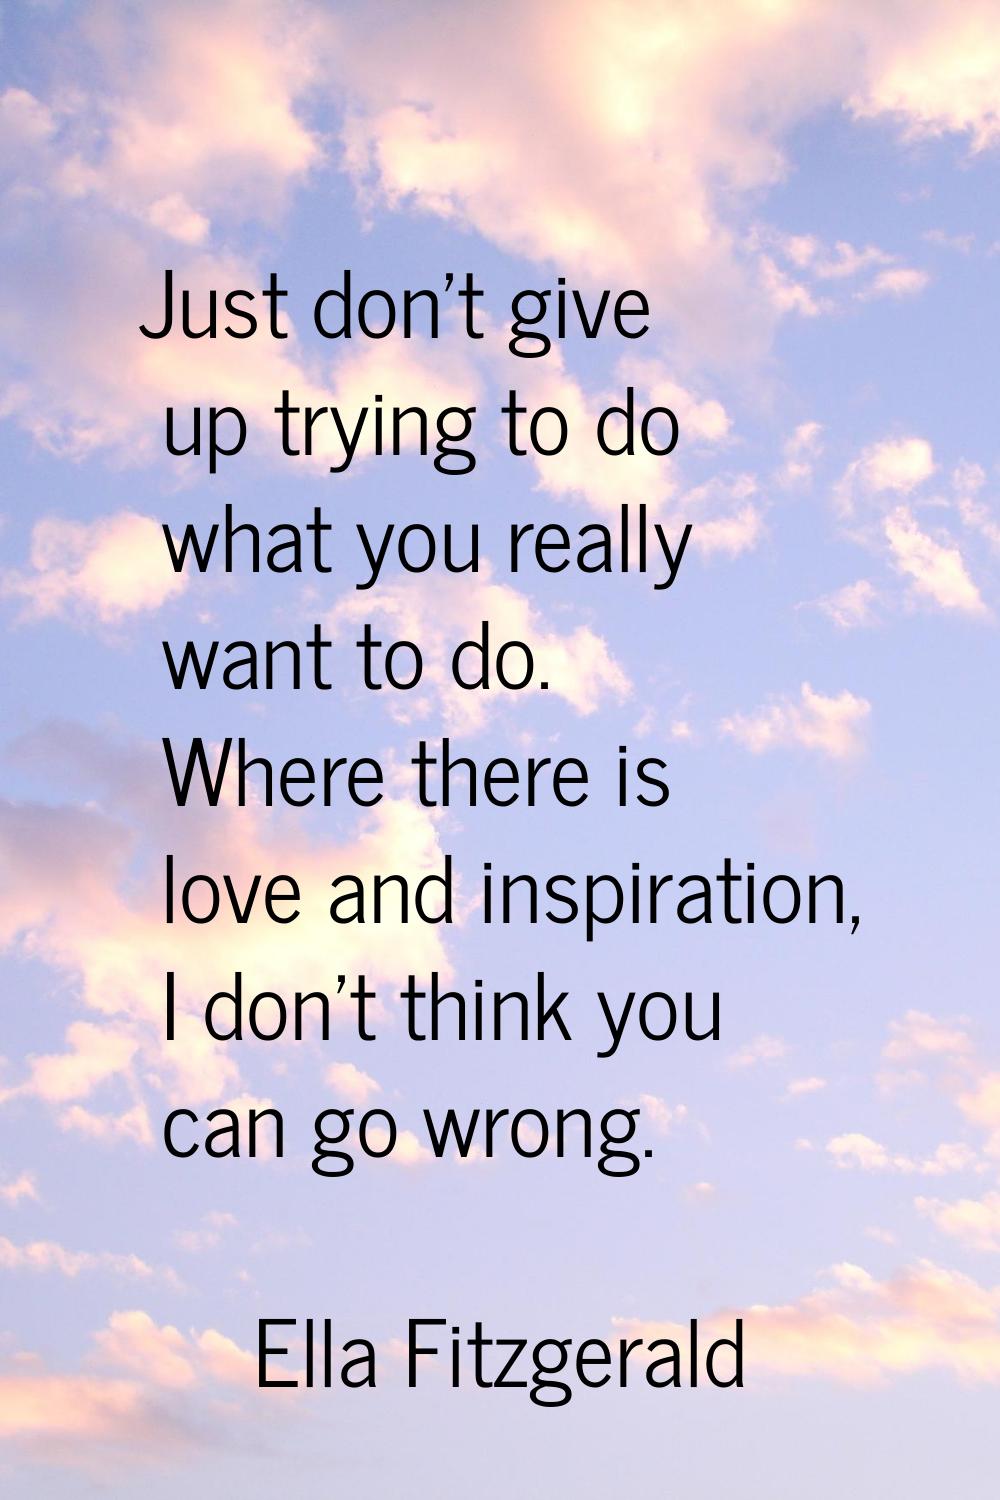 Just don't give up trying to do what you really want to do. Where there is love and inspiration, I 